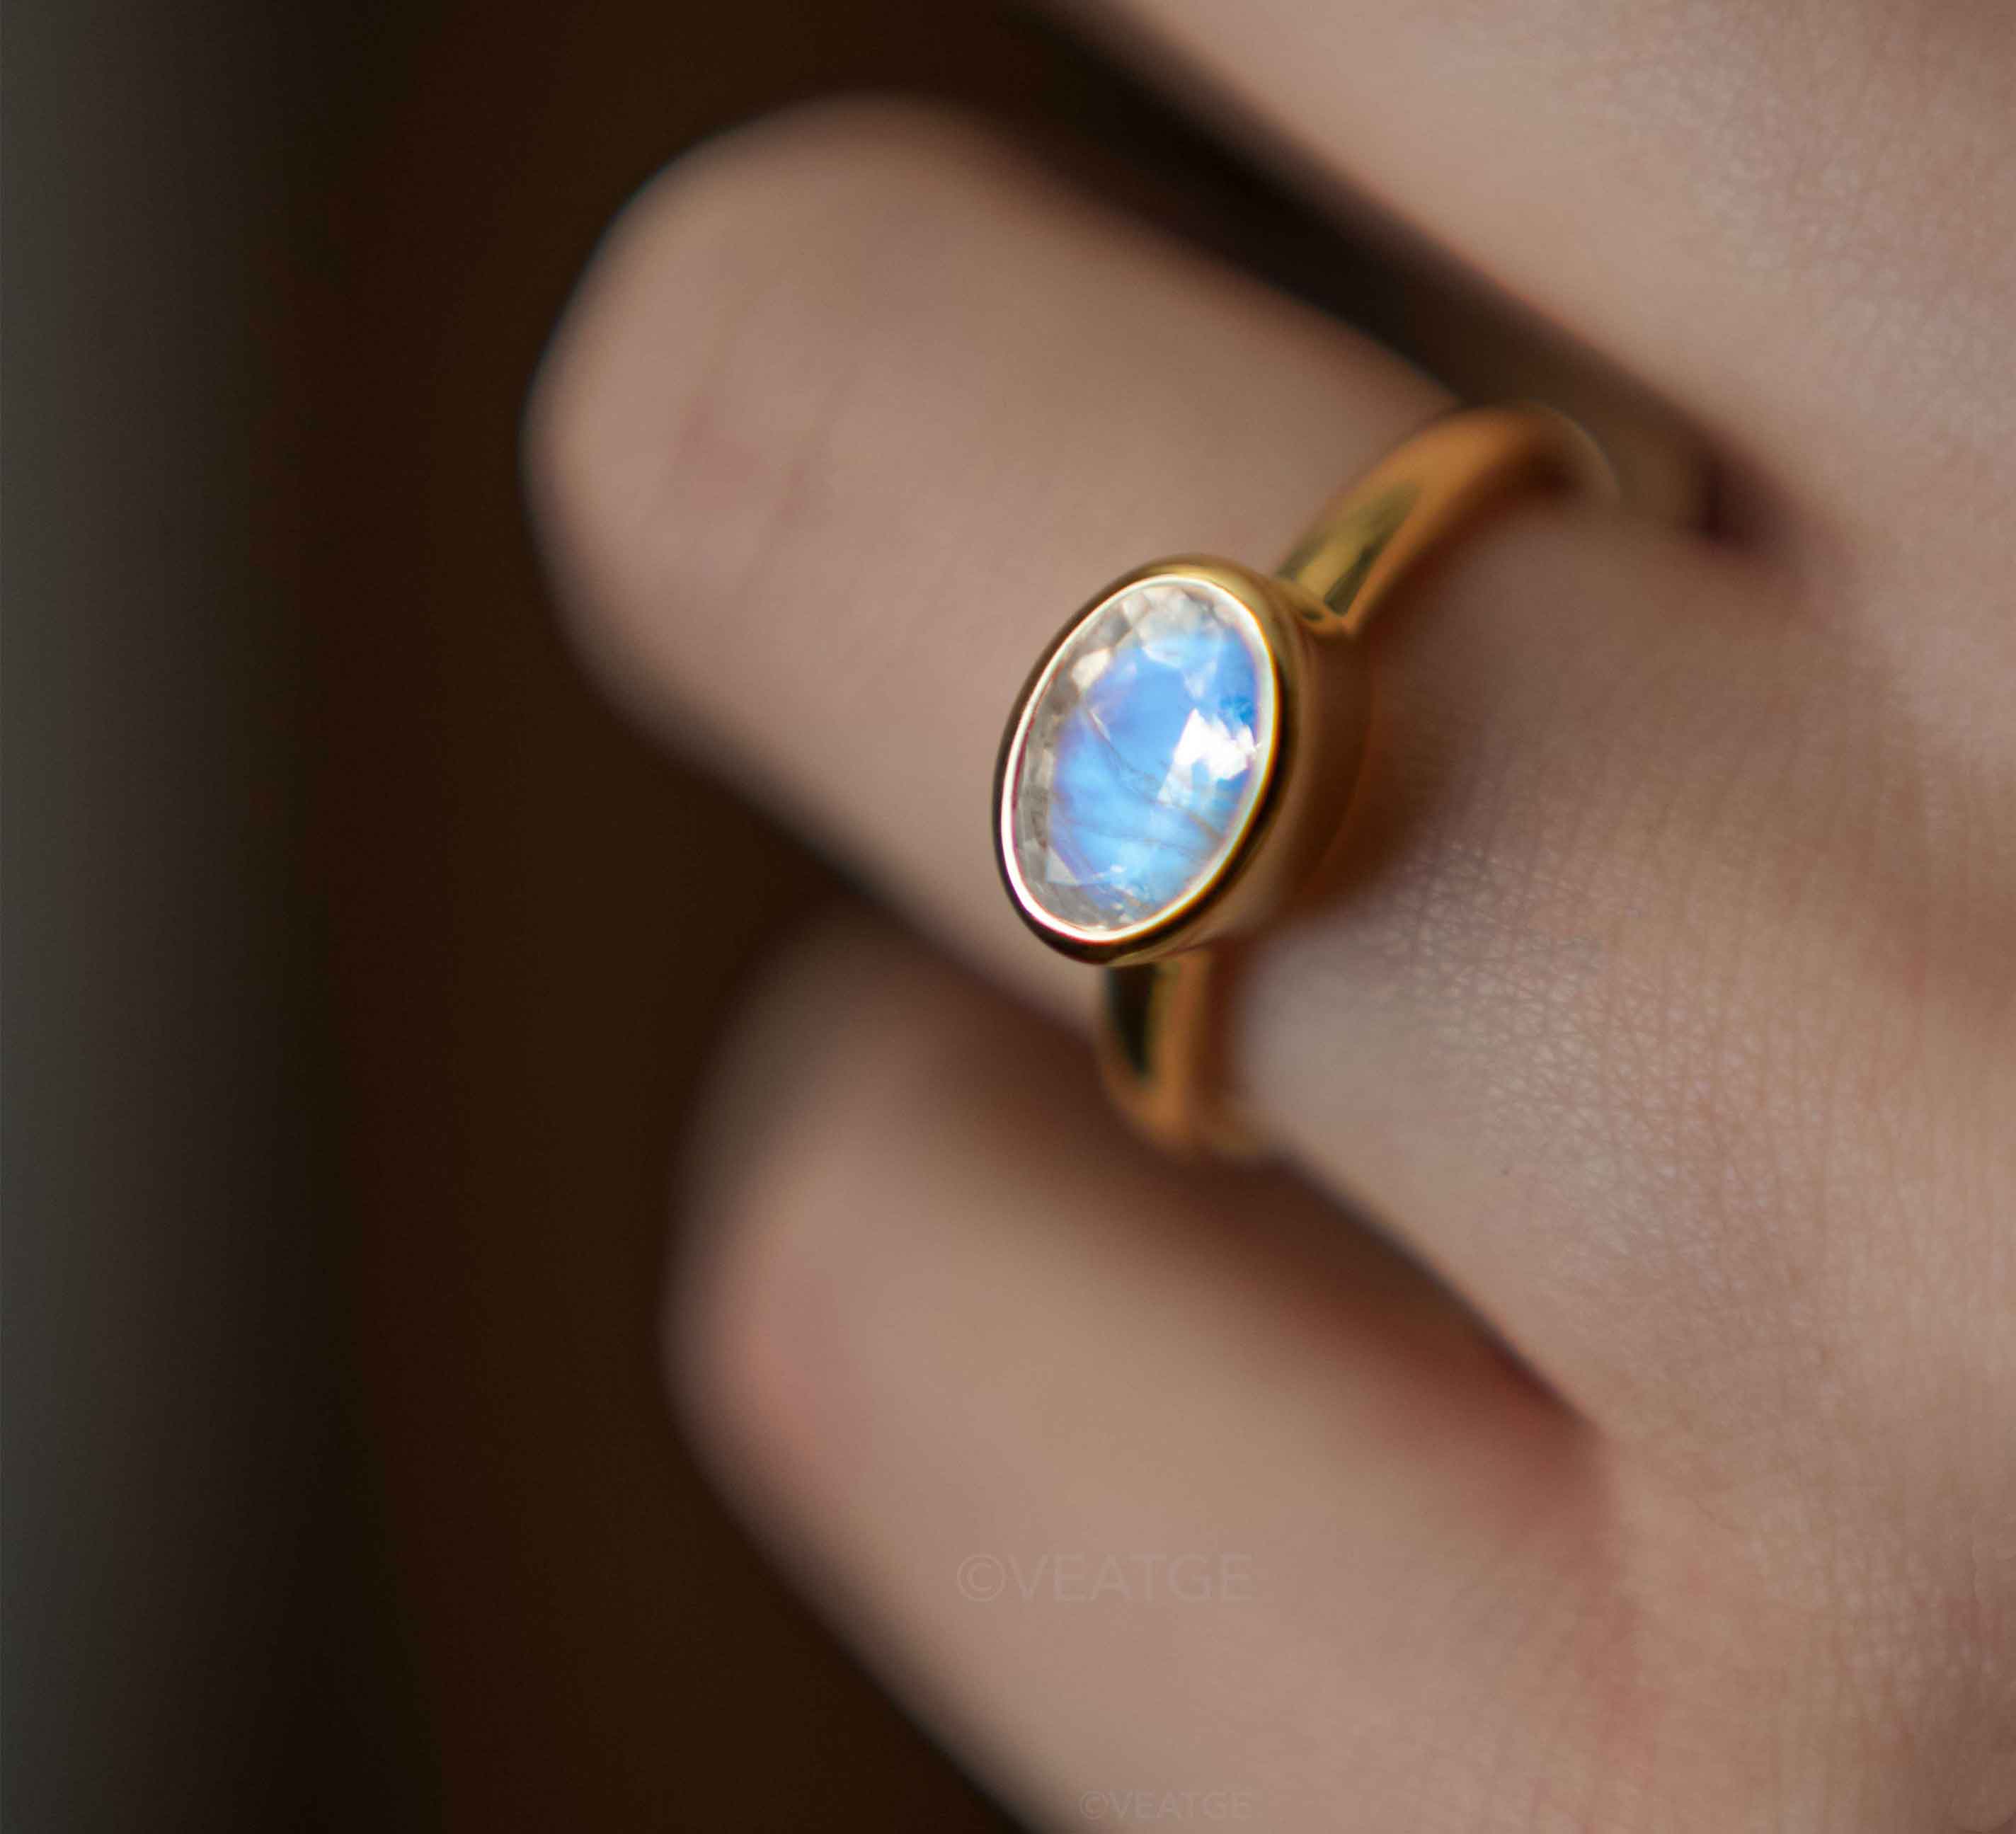 how to care for moonstone jewelry